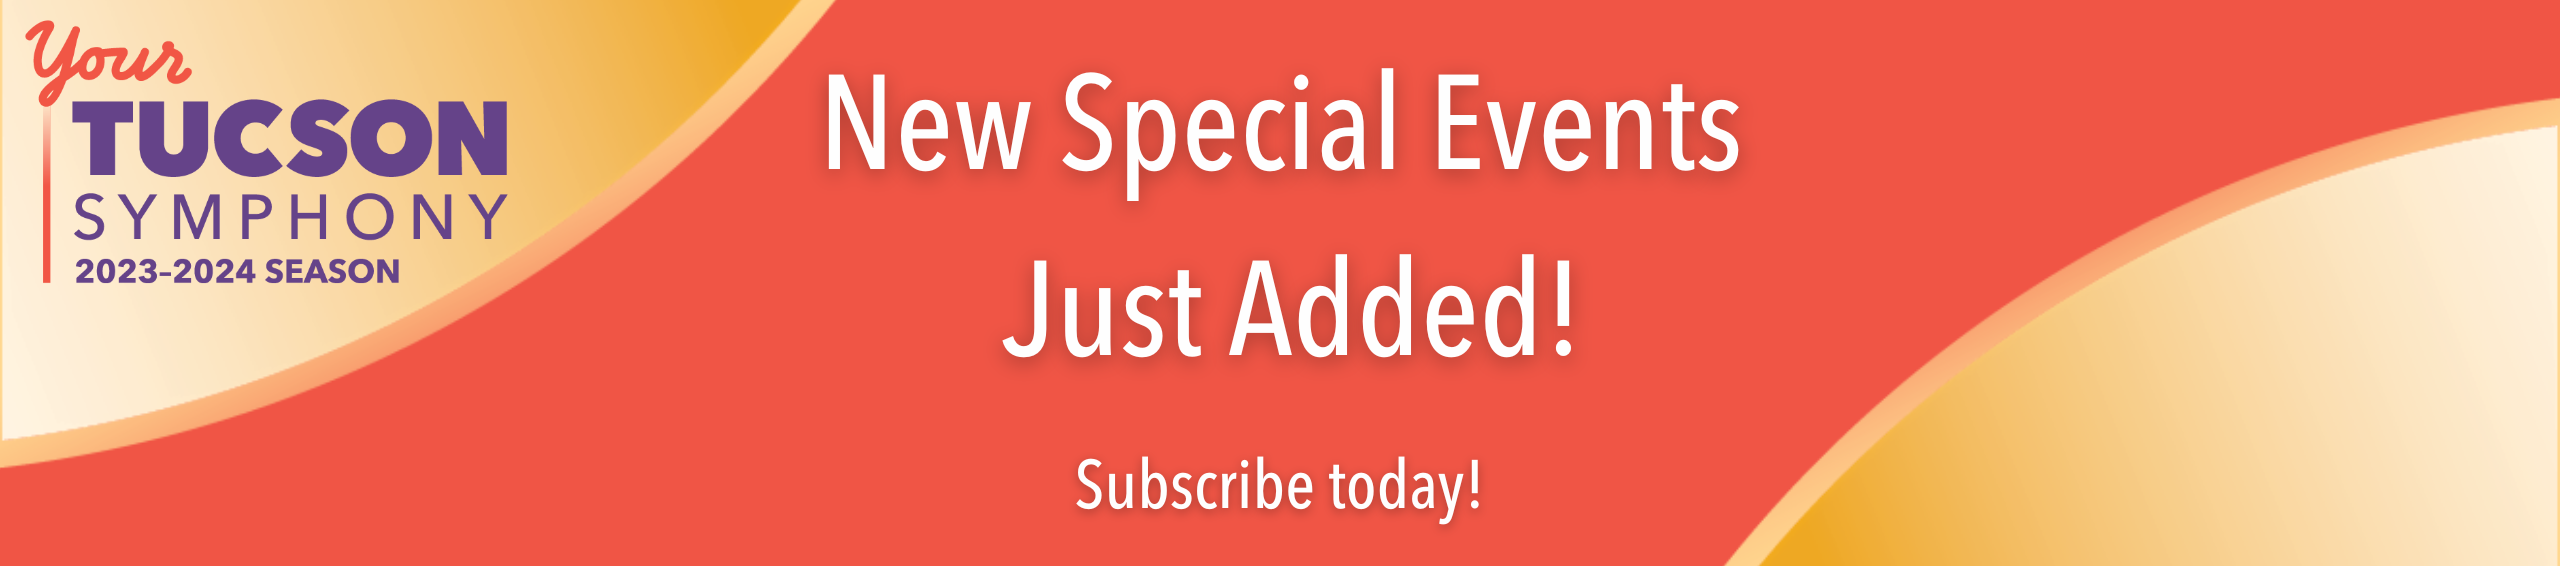 New Special Events Just Added! - Subscribe Today!